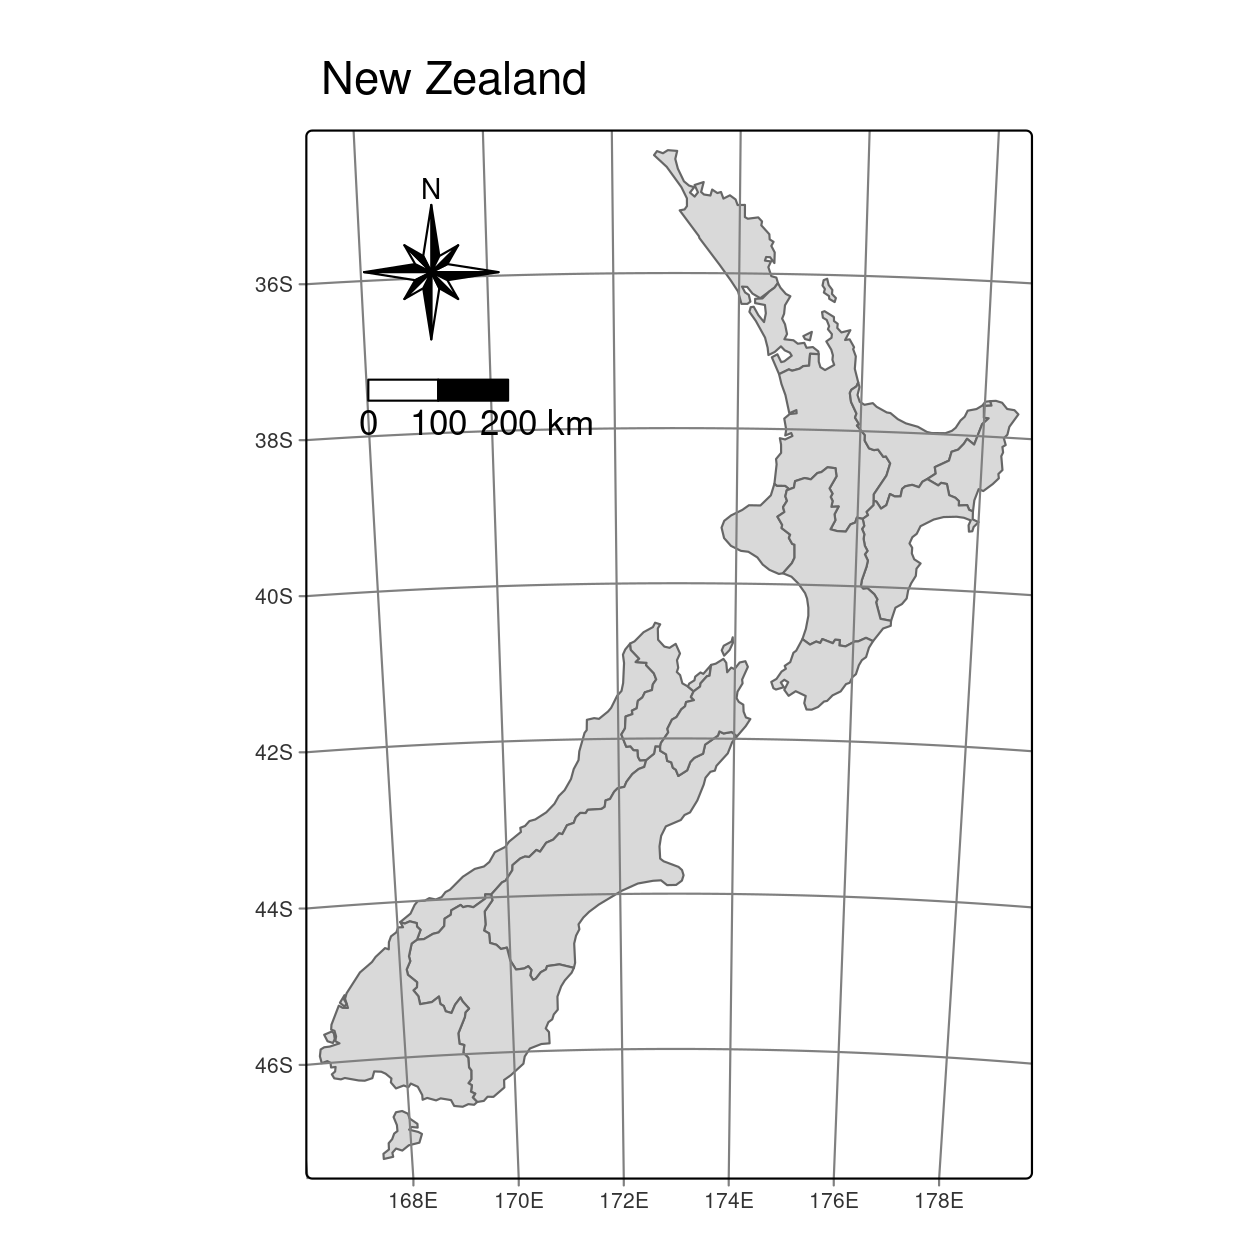 Map with additional elements - a north arrow and scale bar.